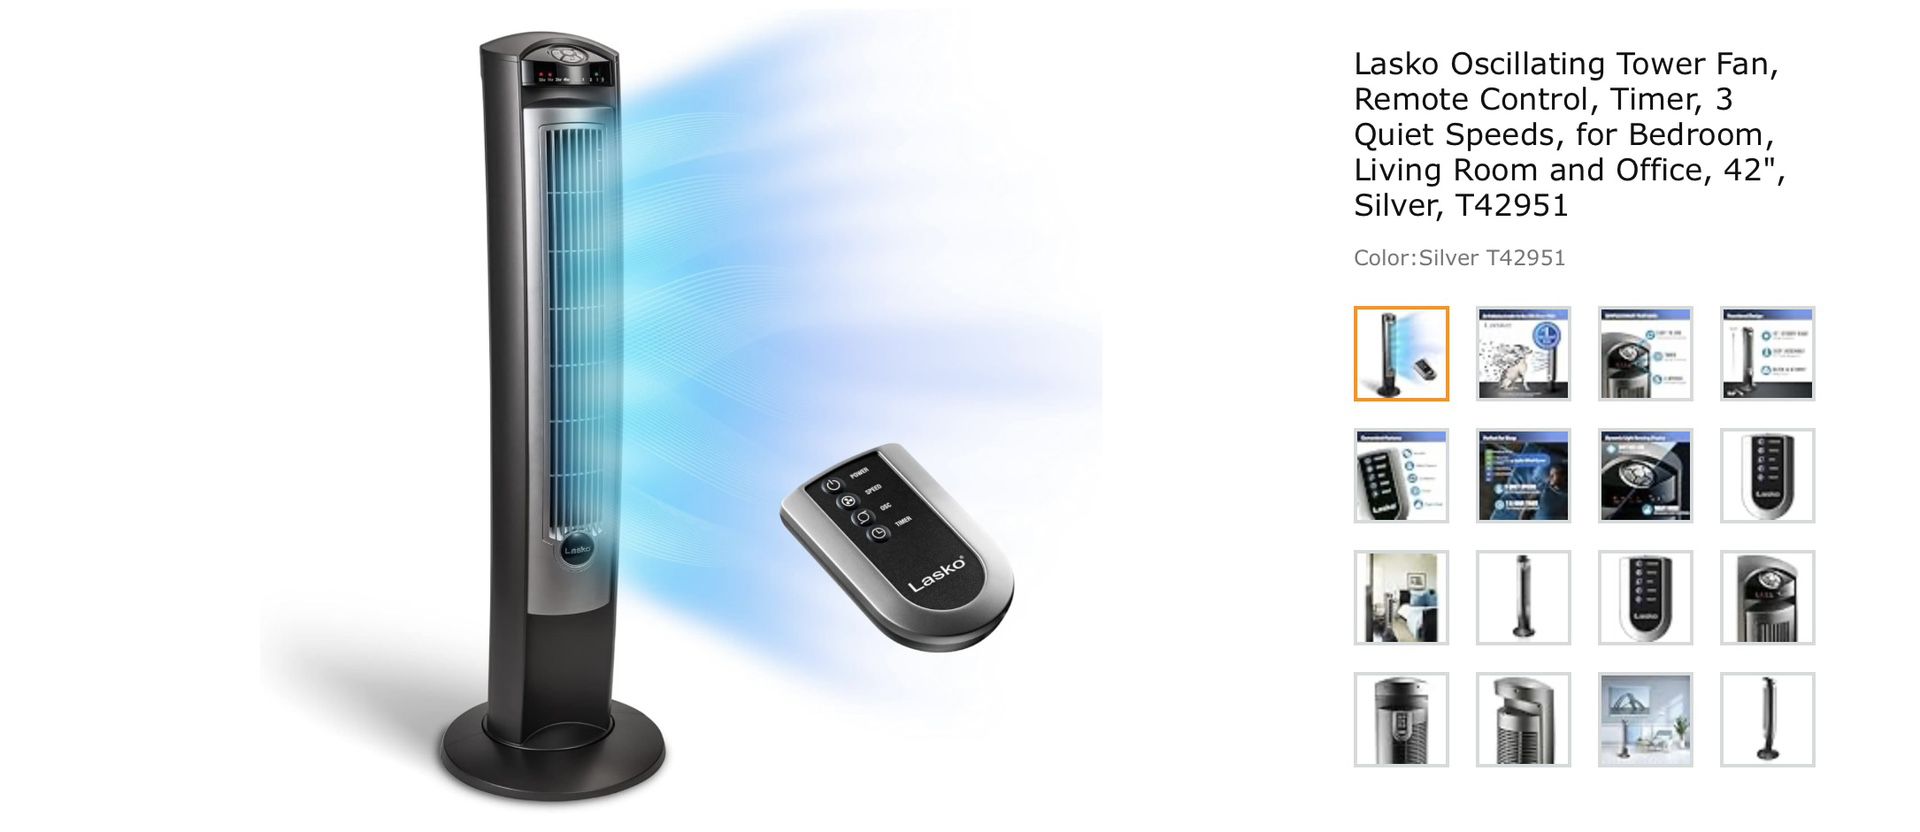 Lasso Oscillating Tower Fan With Remote Control